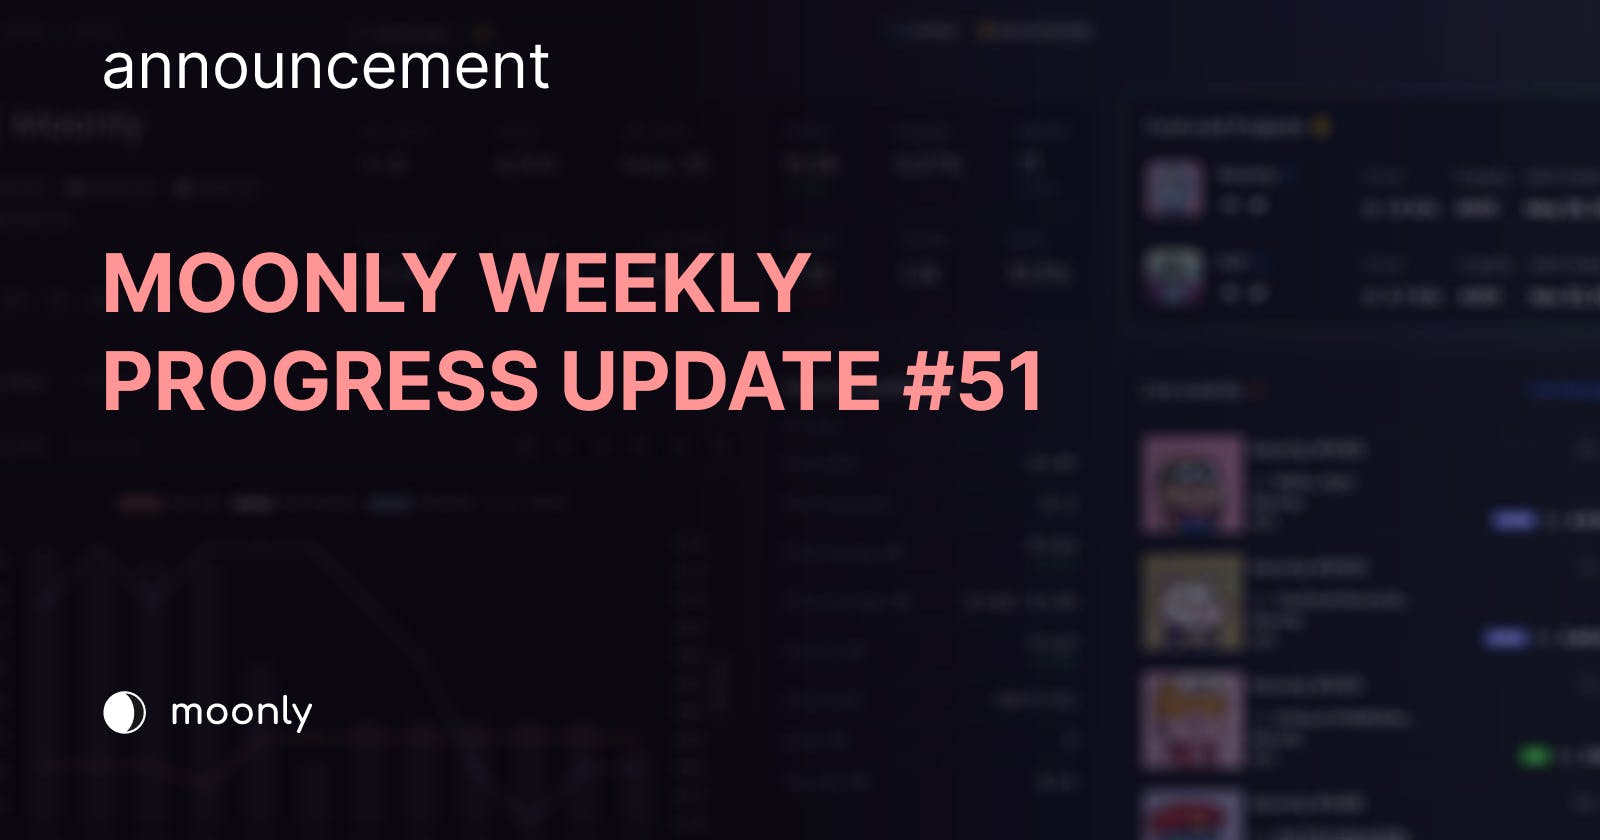 Moonly weekly progress update #51 - Happy birthday Moonly!